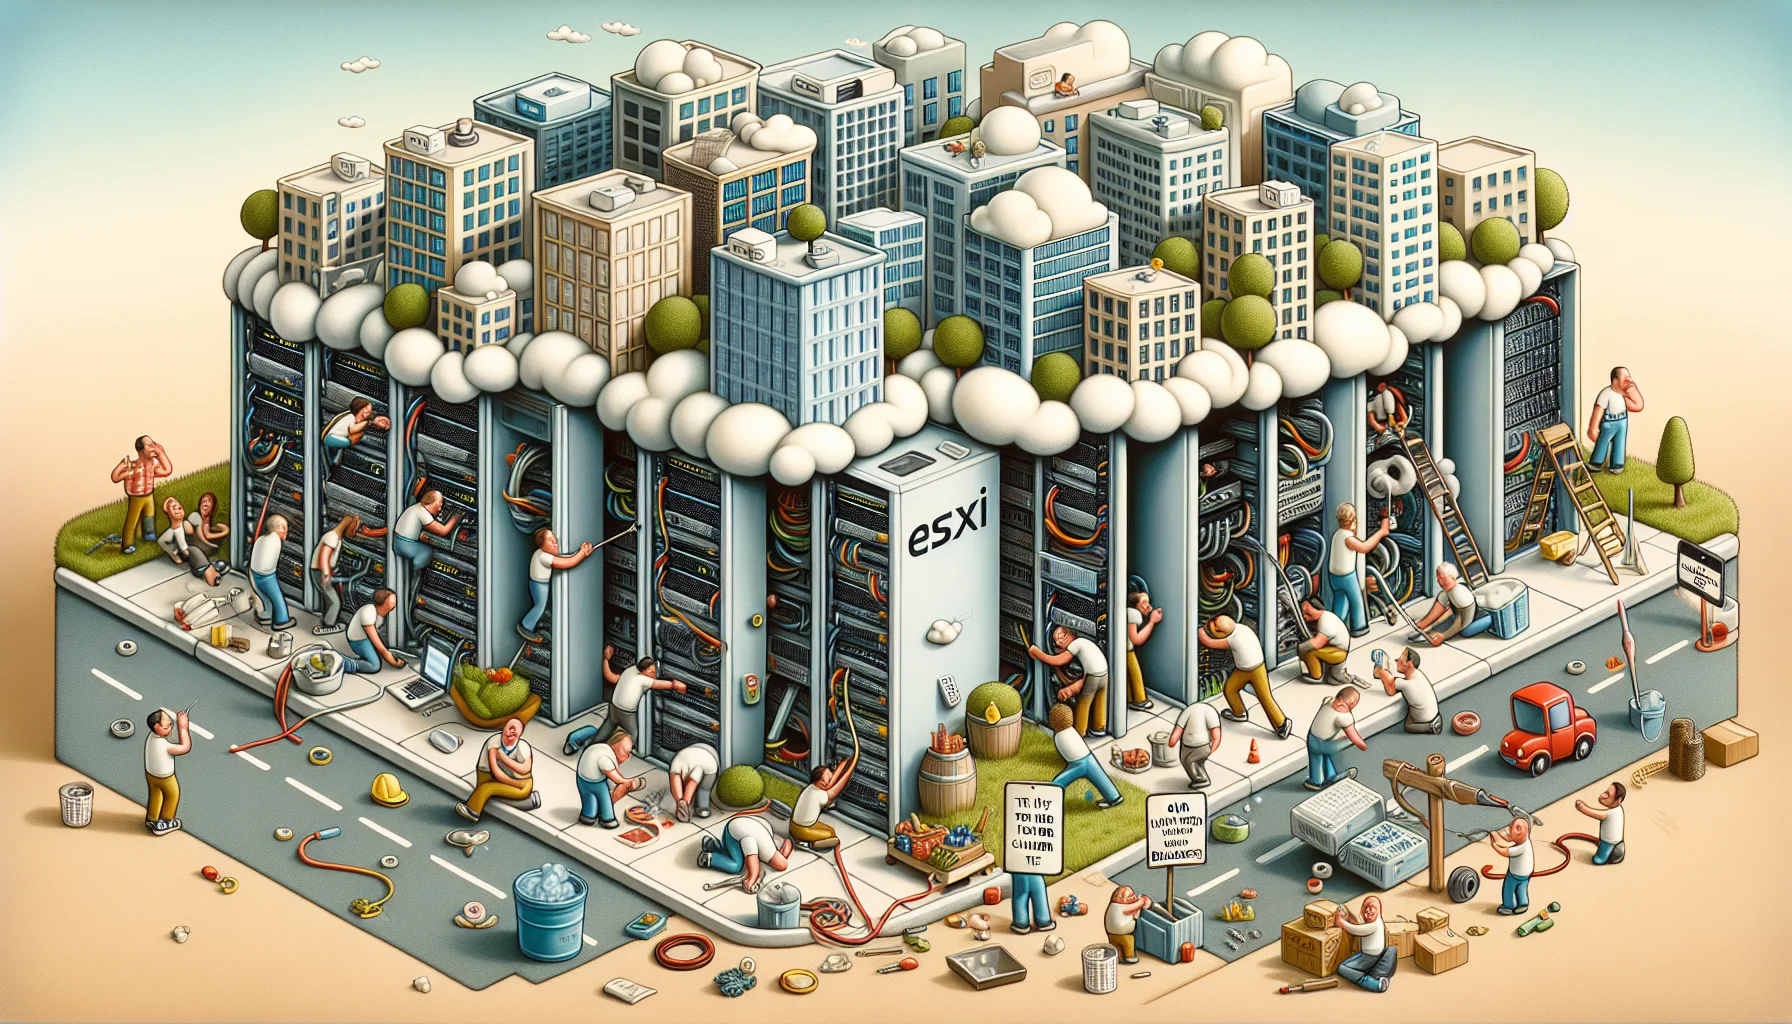 Create a humorous yet realistic representation of ESXi Cloud Hosting. Imagine a sideways cityscape in the cloud, complete with individual buildings representing servers. People of varied descents, such as Caucasian, Black, Hispanic, and so on, are tending to the servers: tightening bolts, lubricating gears and pulling cloud fluffs instead of cables. Some of them are laughing, some are scratching their heads in confusion. Scattered around are peculiar signs like 'This way for unlimited bandwidth' or 'Our clouds never rain - 99.99% uptime'. The overall impression should be playful, whimsical, yet advanced technological infrastructure at the heart of it.